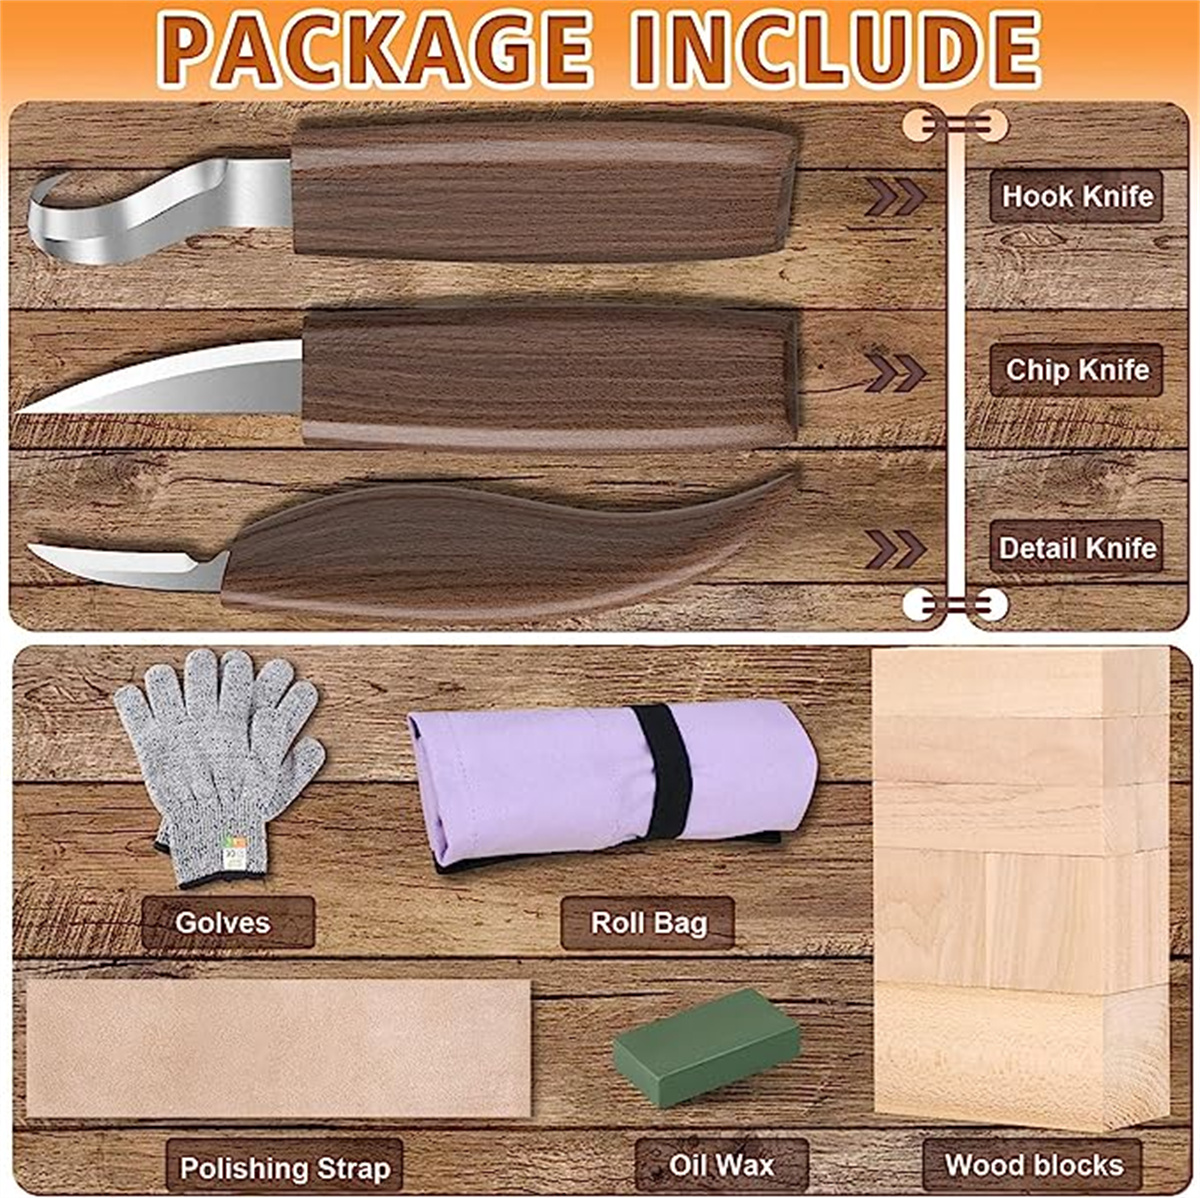 7 in 1 Wood Carving Tools Kit with Carving Hook Knife Wood Whittling Knife Chip Carving Knife Gloves Carving Knife Sharpener for Beginners Woodworking kit